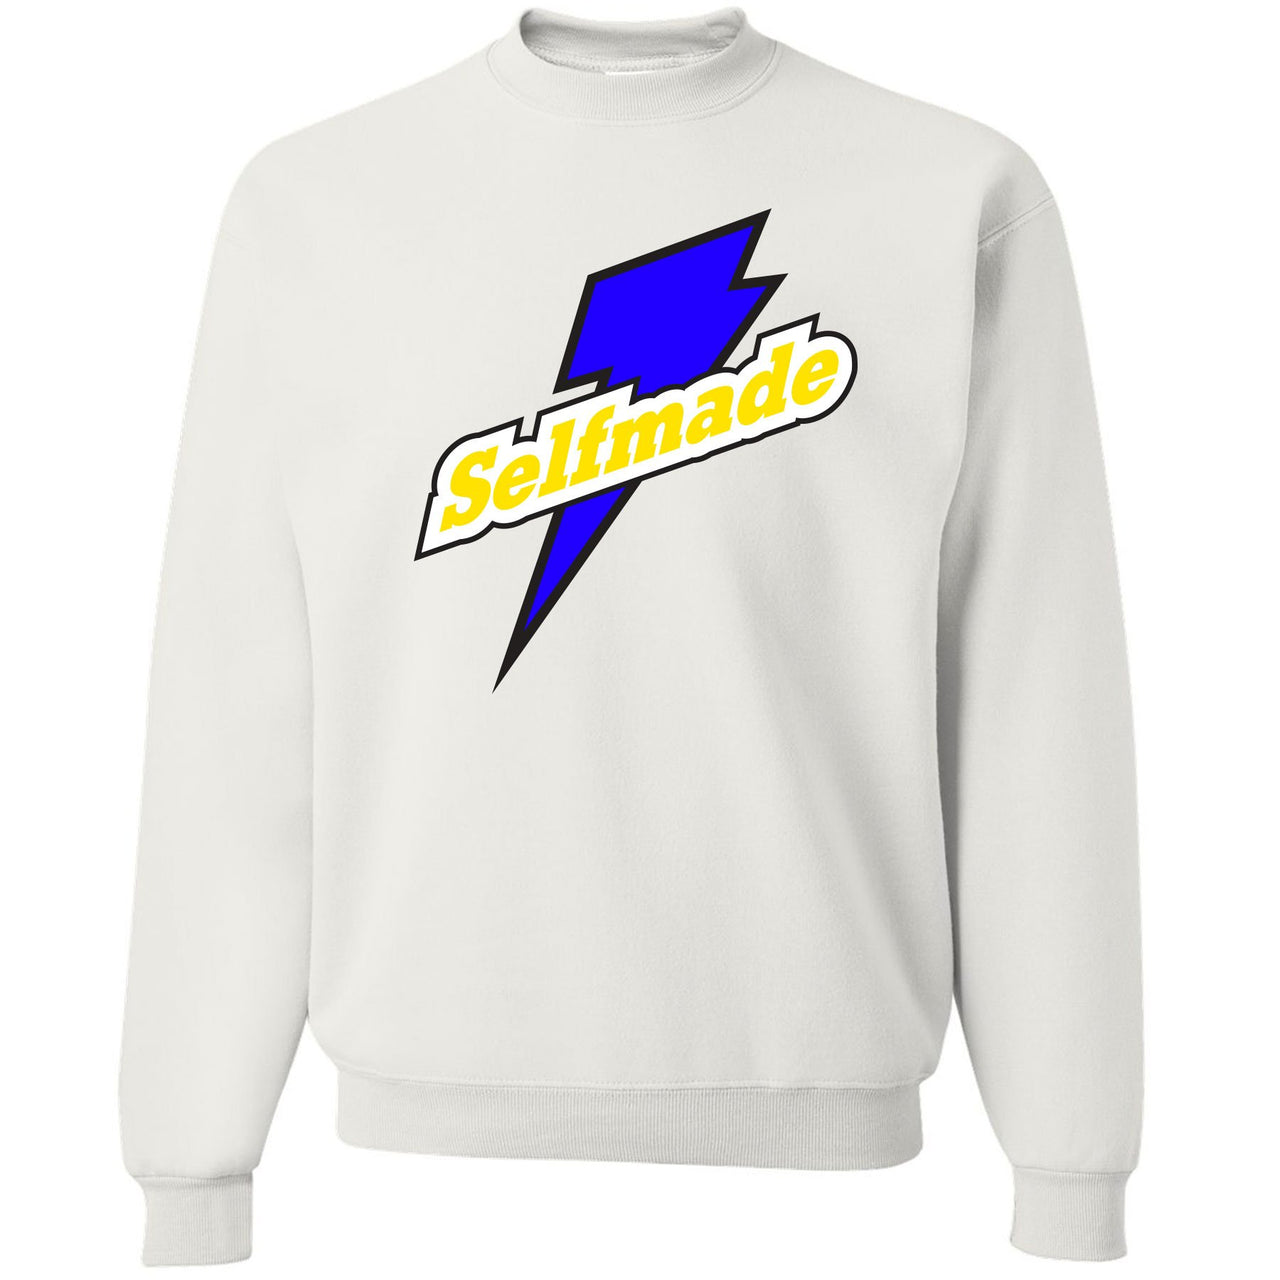 Printed on the front of the Air Jordan 5 Laney Selfmade sneaker matching crewneck is the Laney sneaker matching logo